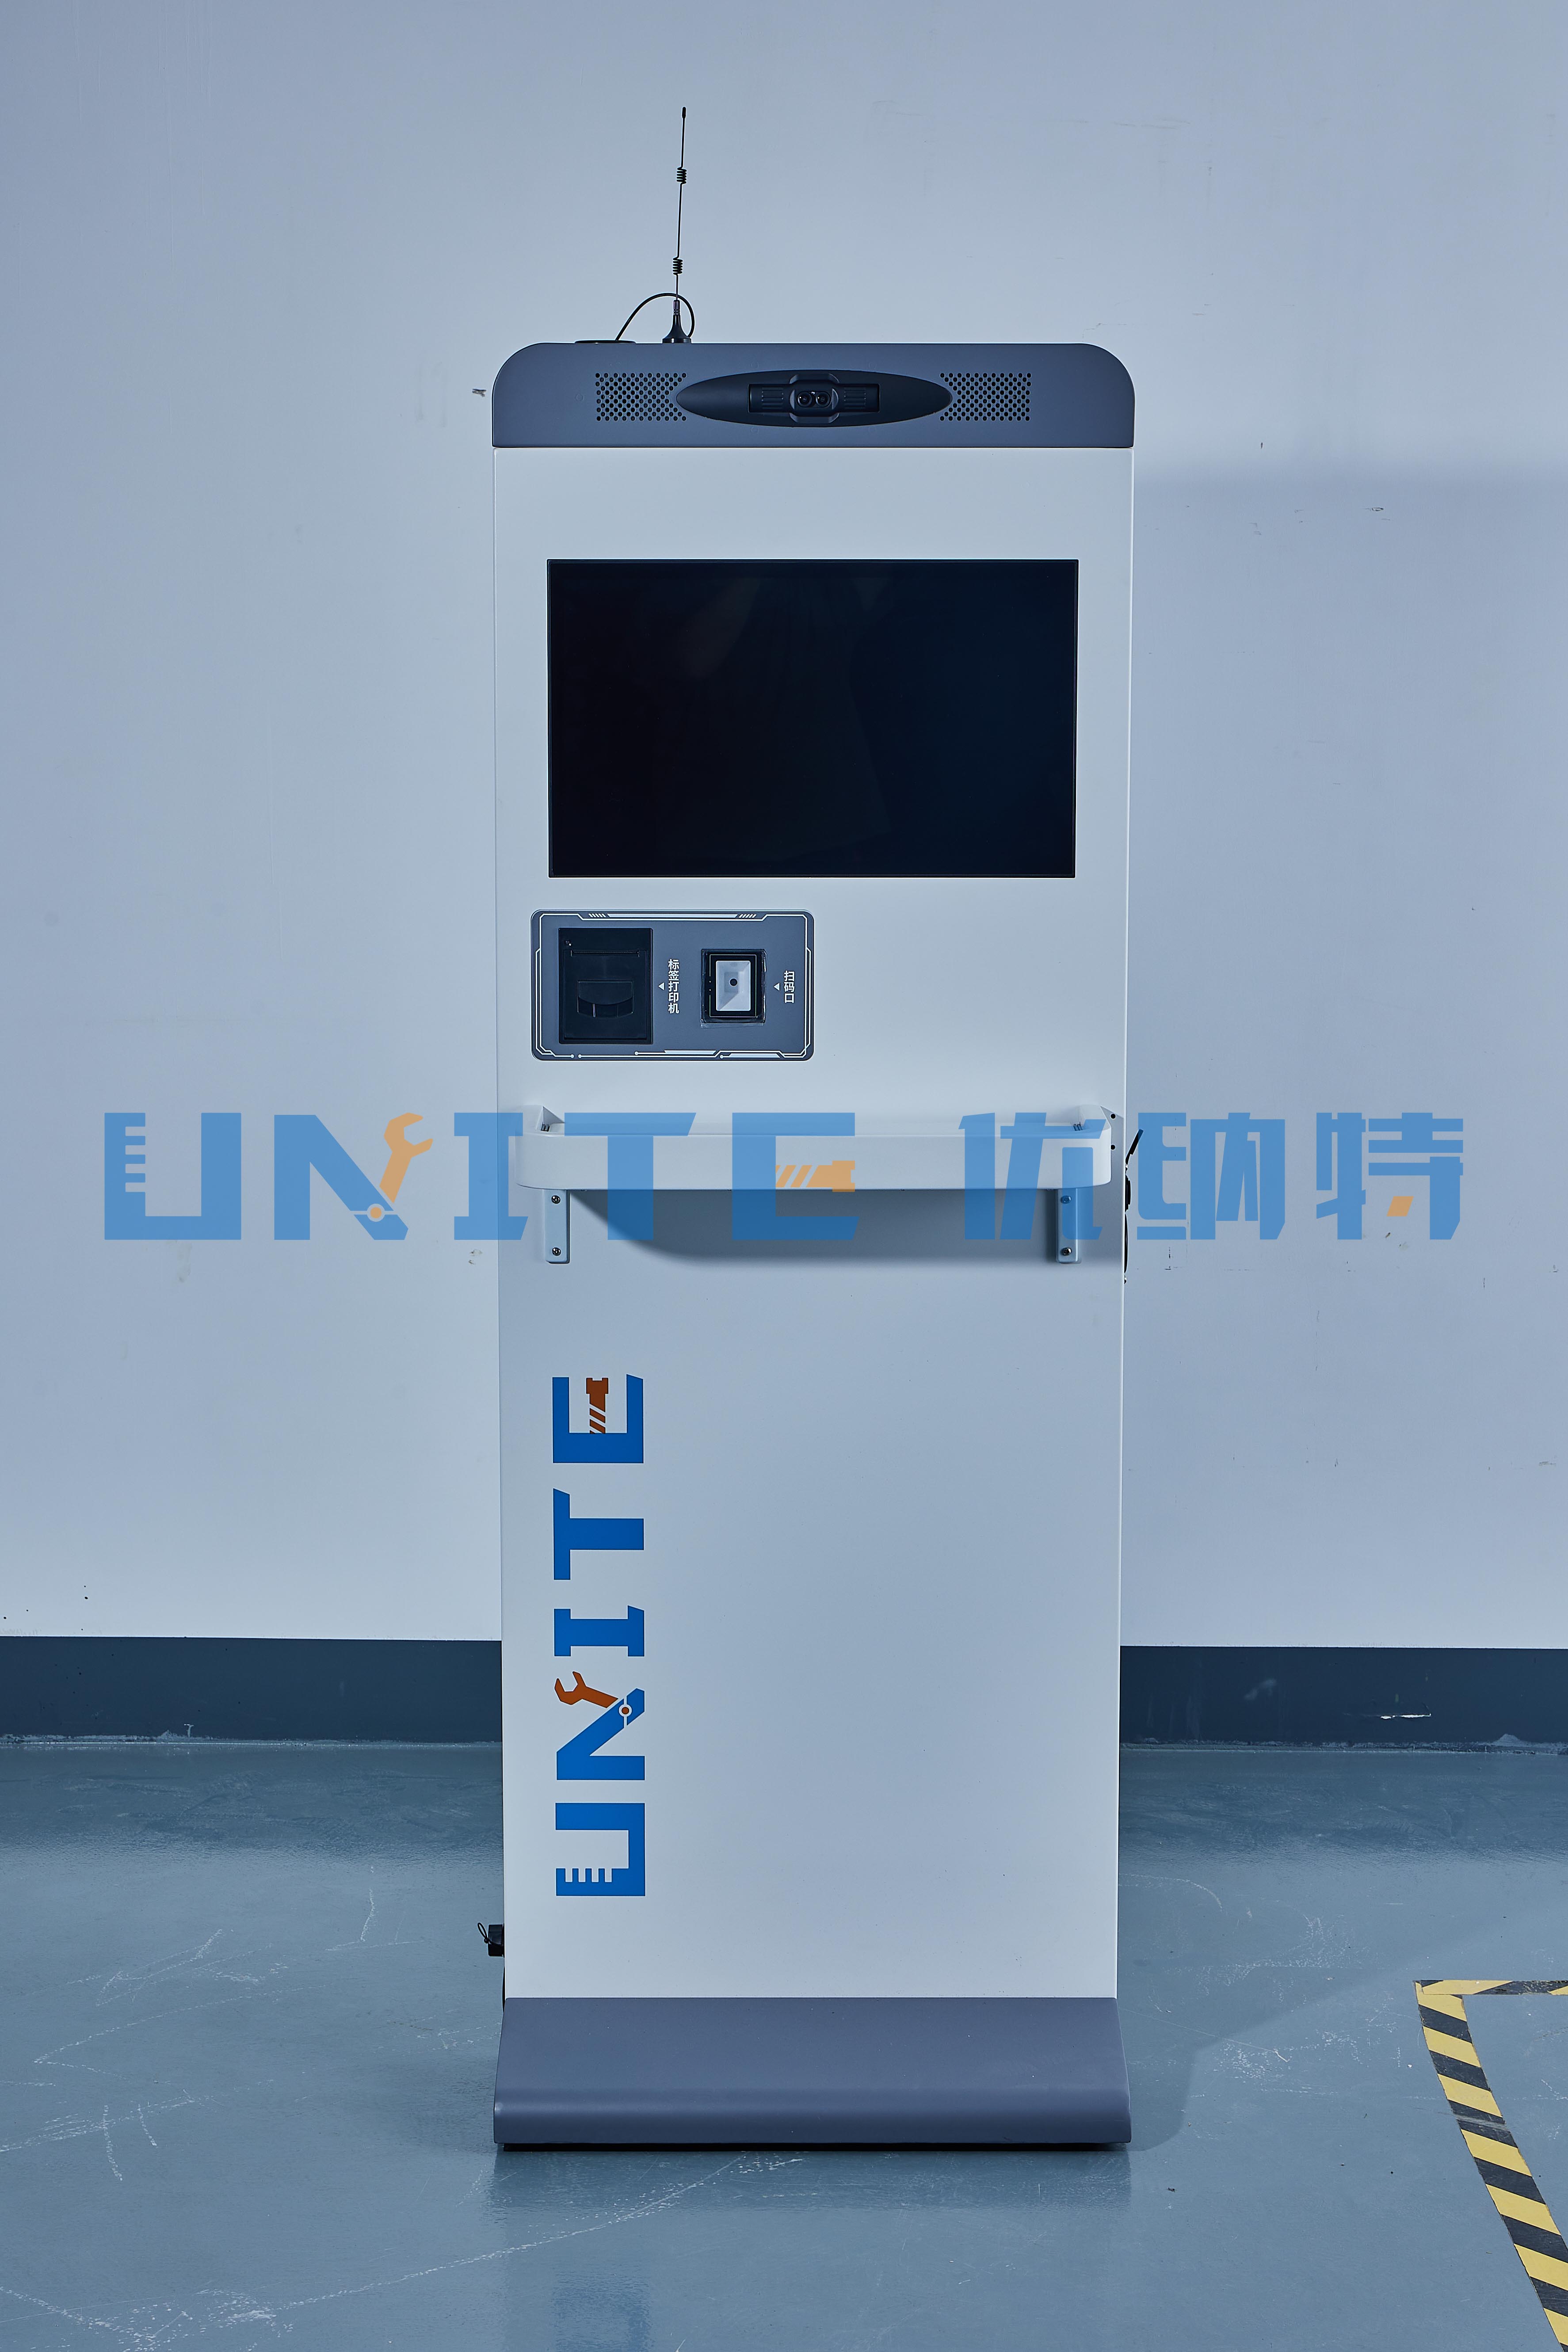 Unite Usample T-L Fast & Convenient Vertical Warehouse Control Platform with Embedded Industrial Keyboard and Mouse